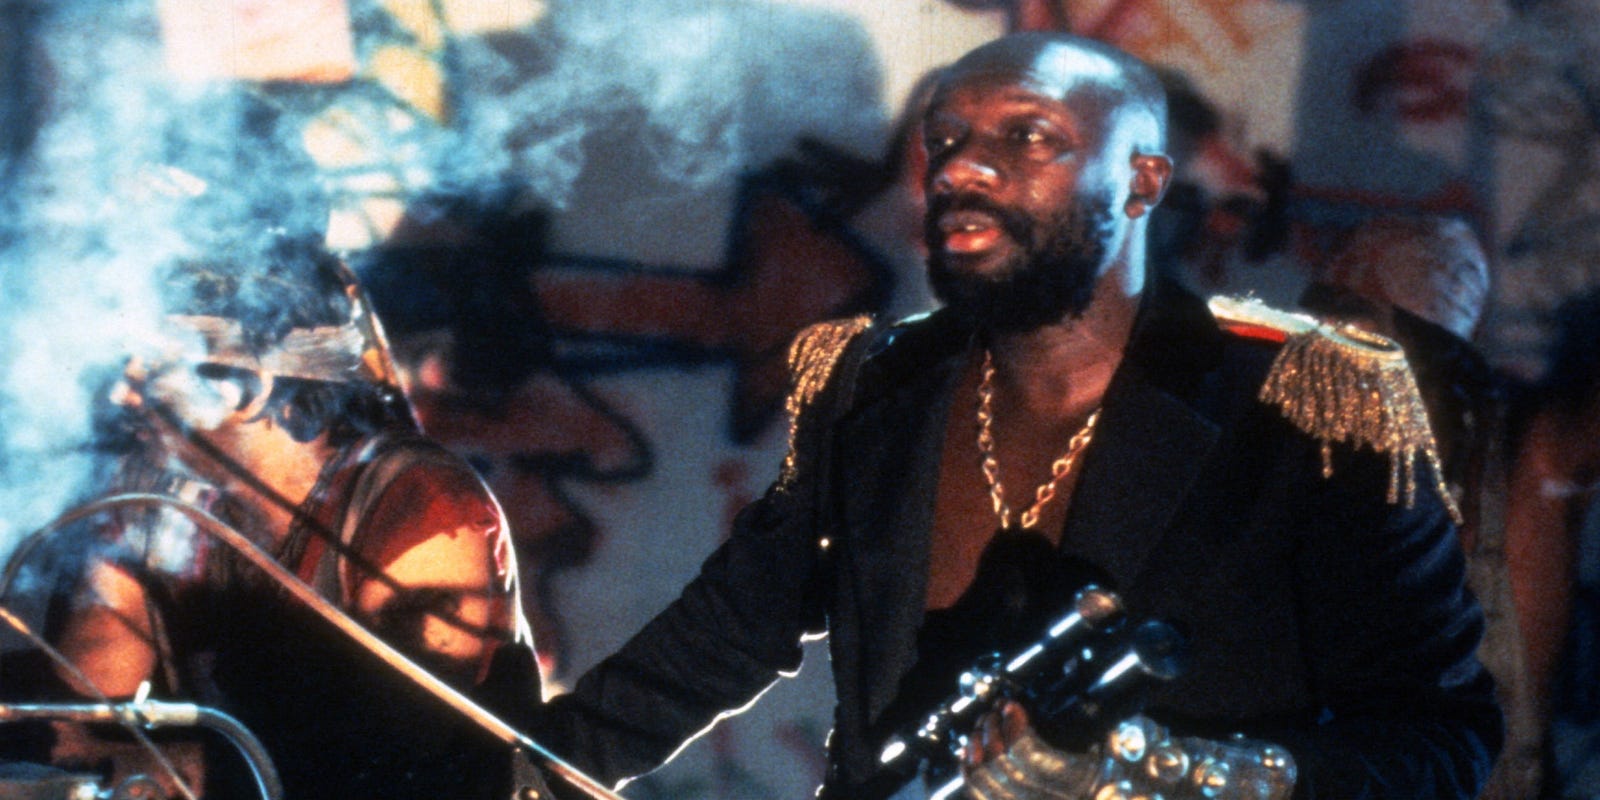 635682435586396165-ESCAPE-FROM-NEW-YORK-ISAAC-HAYES-cropped.jpg